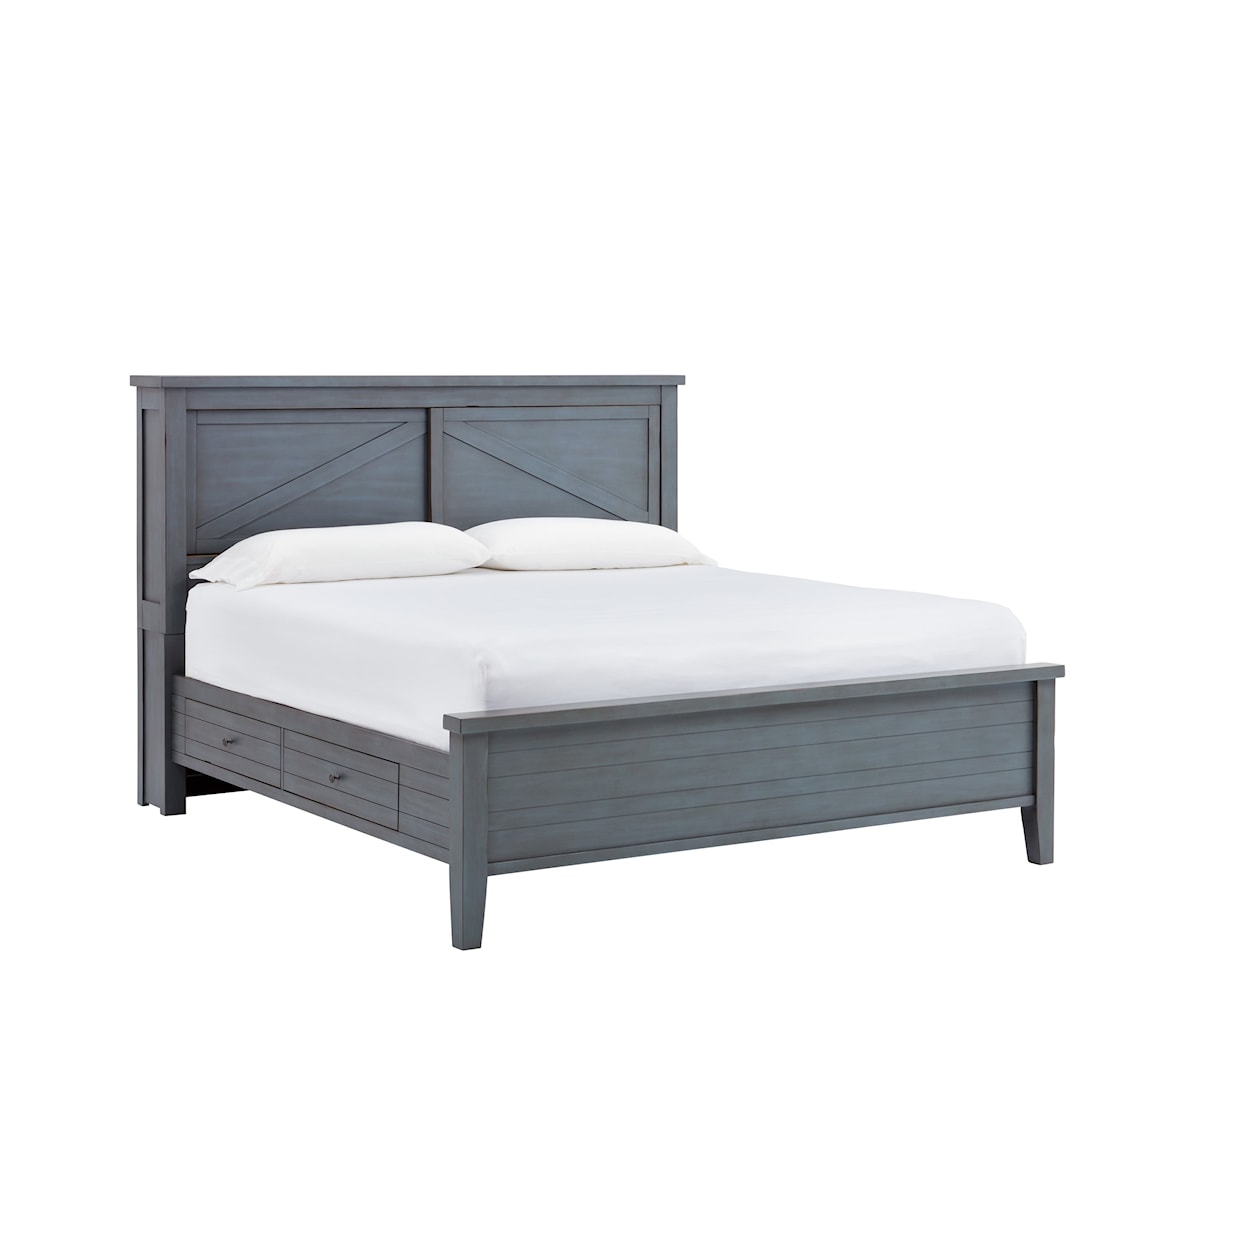 Aspenhome Pinebrook Cal. King Storage Bookcase Bed